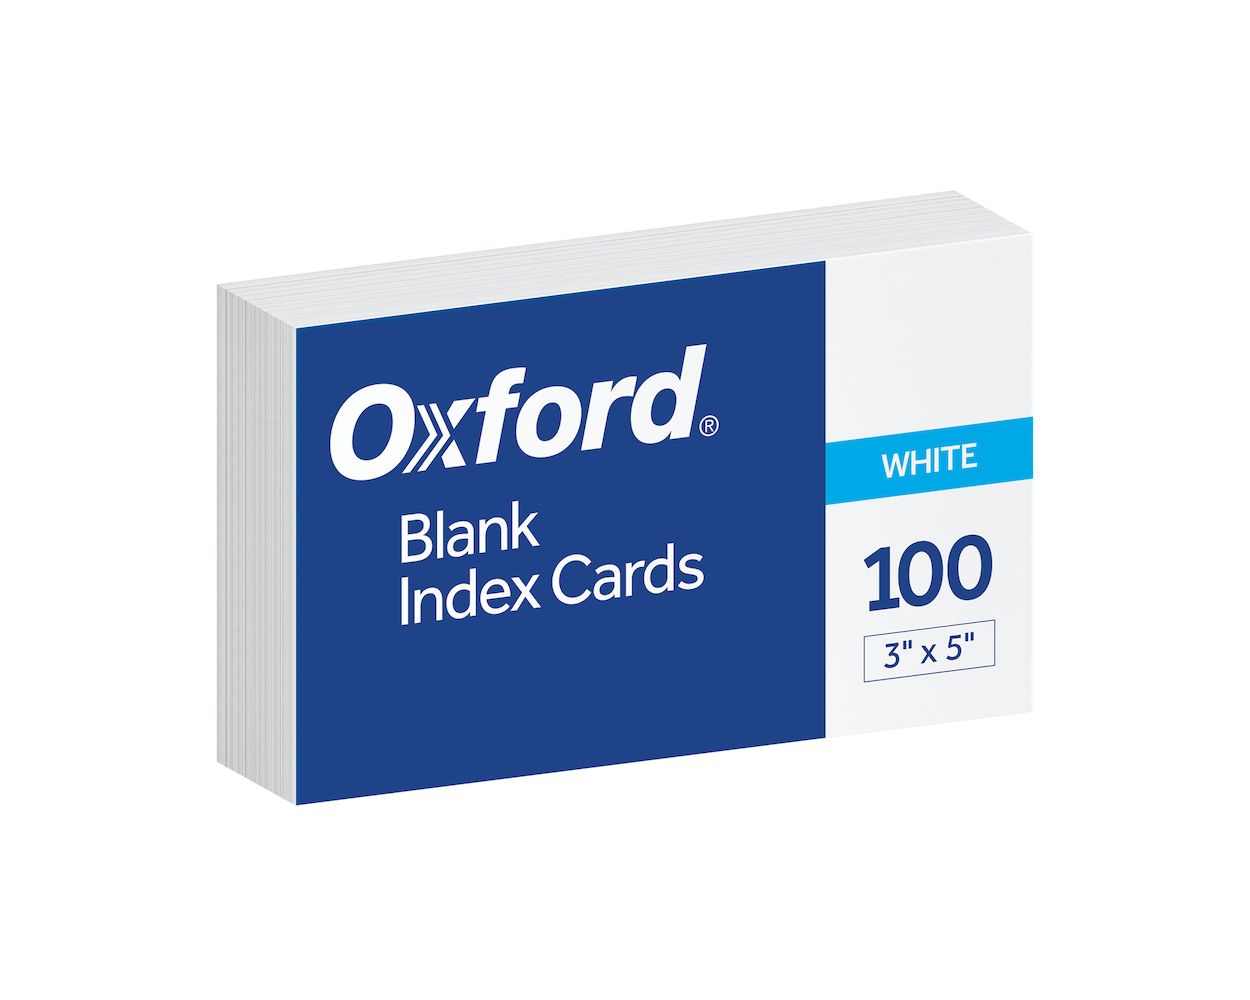 Oxford Blank Index Cards, 3 x 5, White, 100 Per Pack